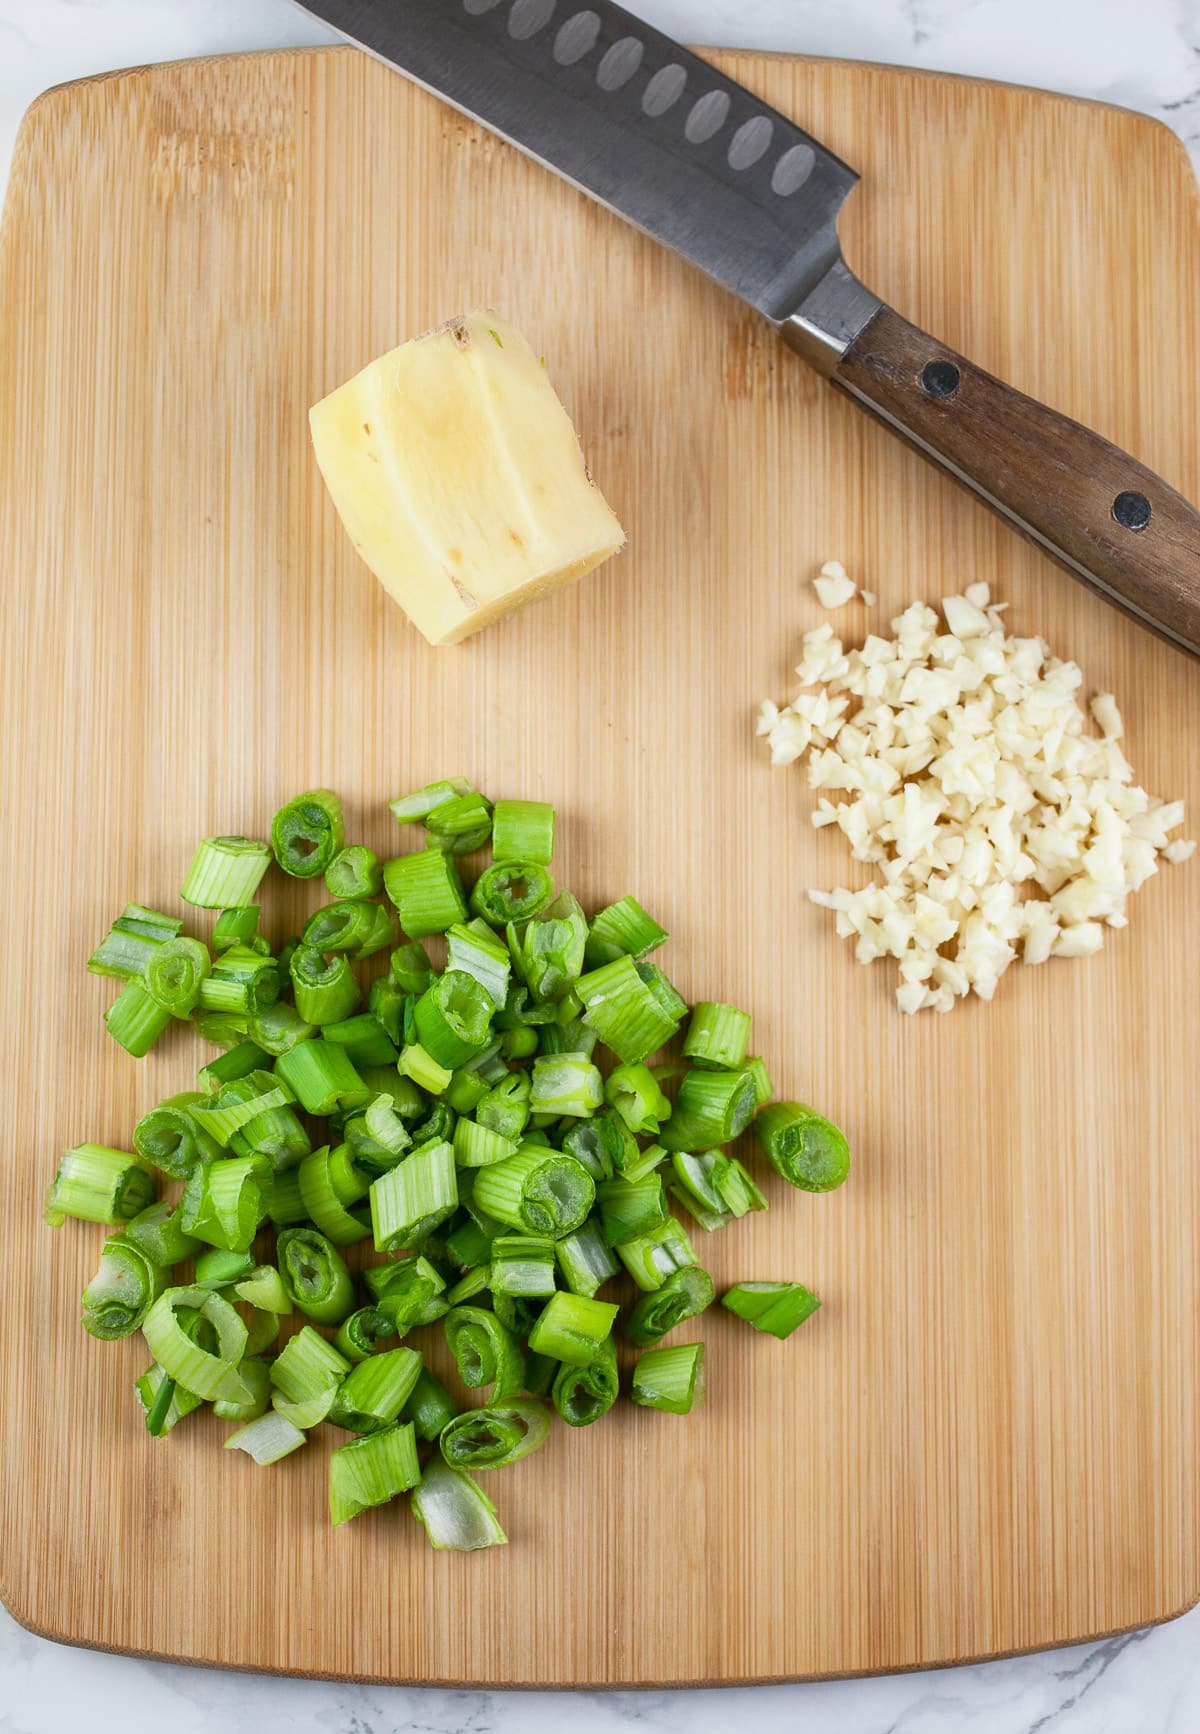 Minced scallions and garlic and ginger root on wooden cutting board with knife.